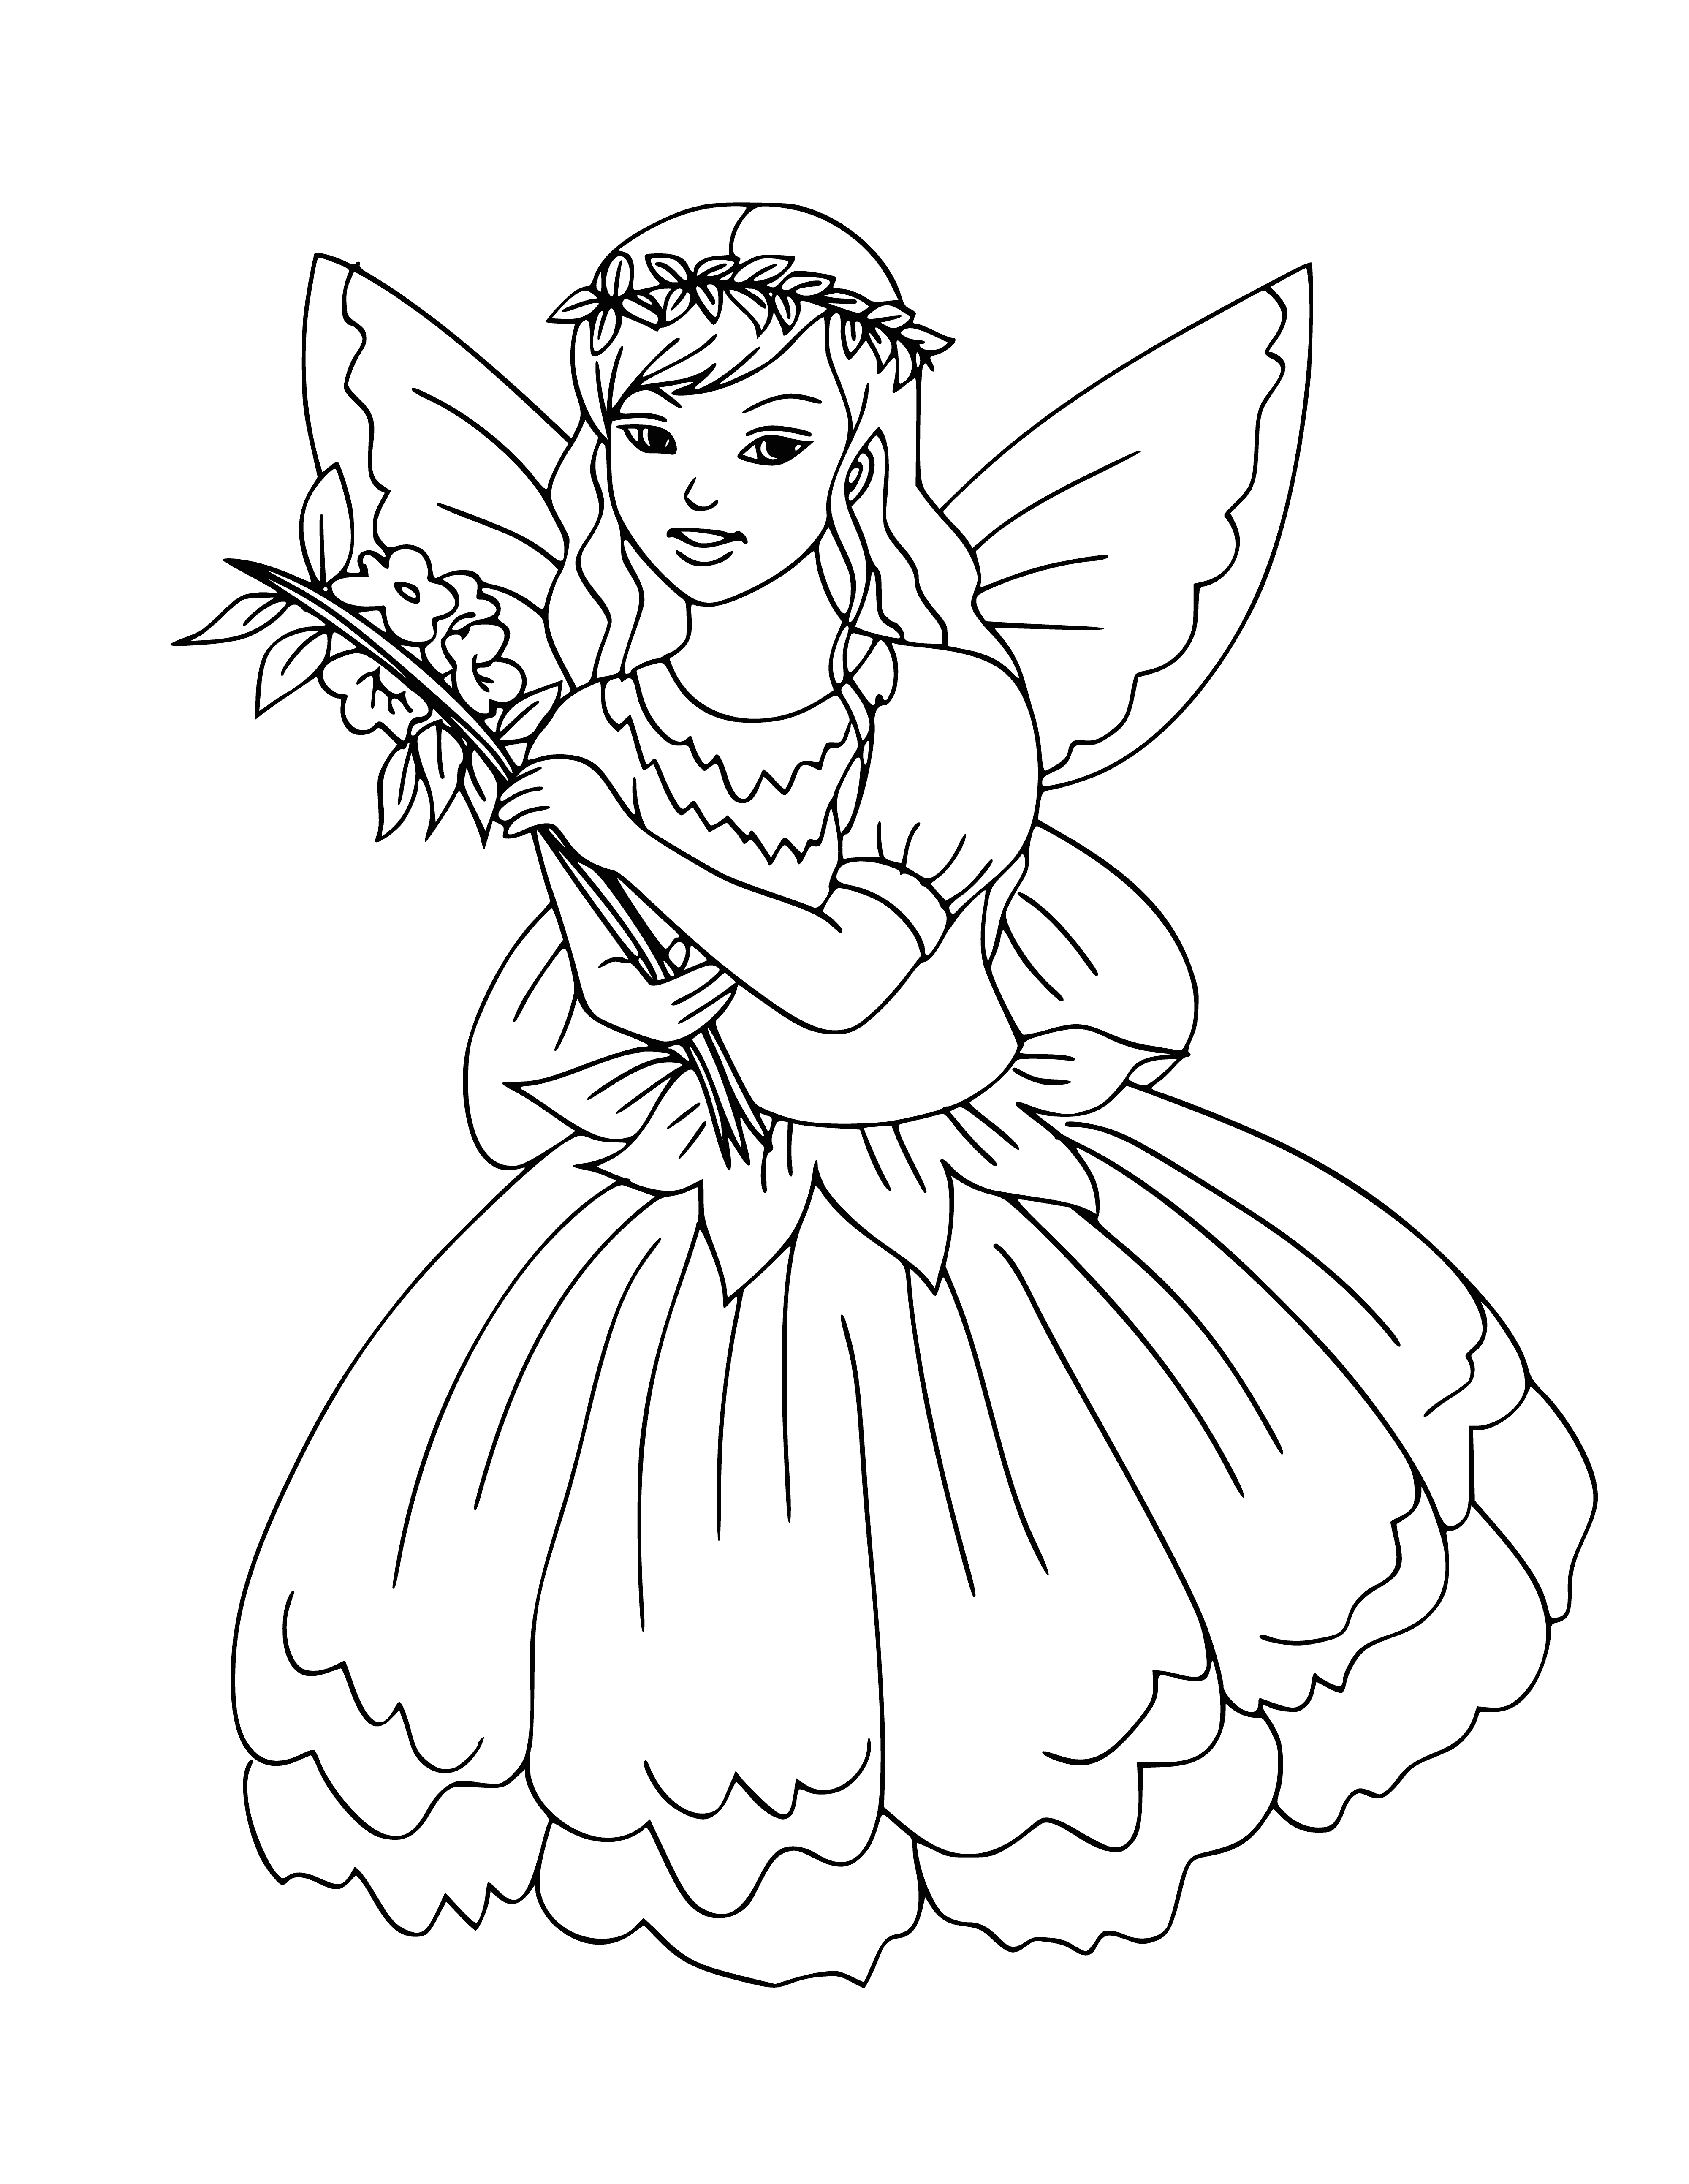 Fairy in a wreath of leaves coloring page